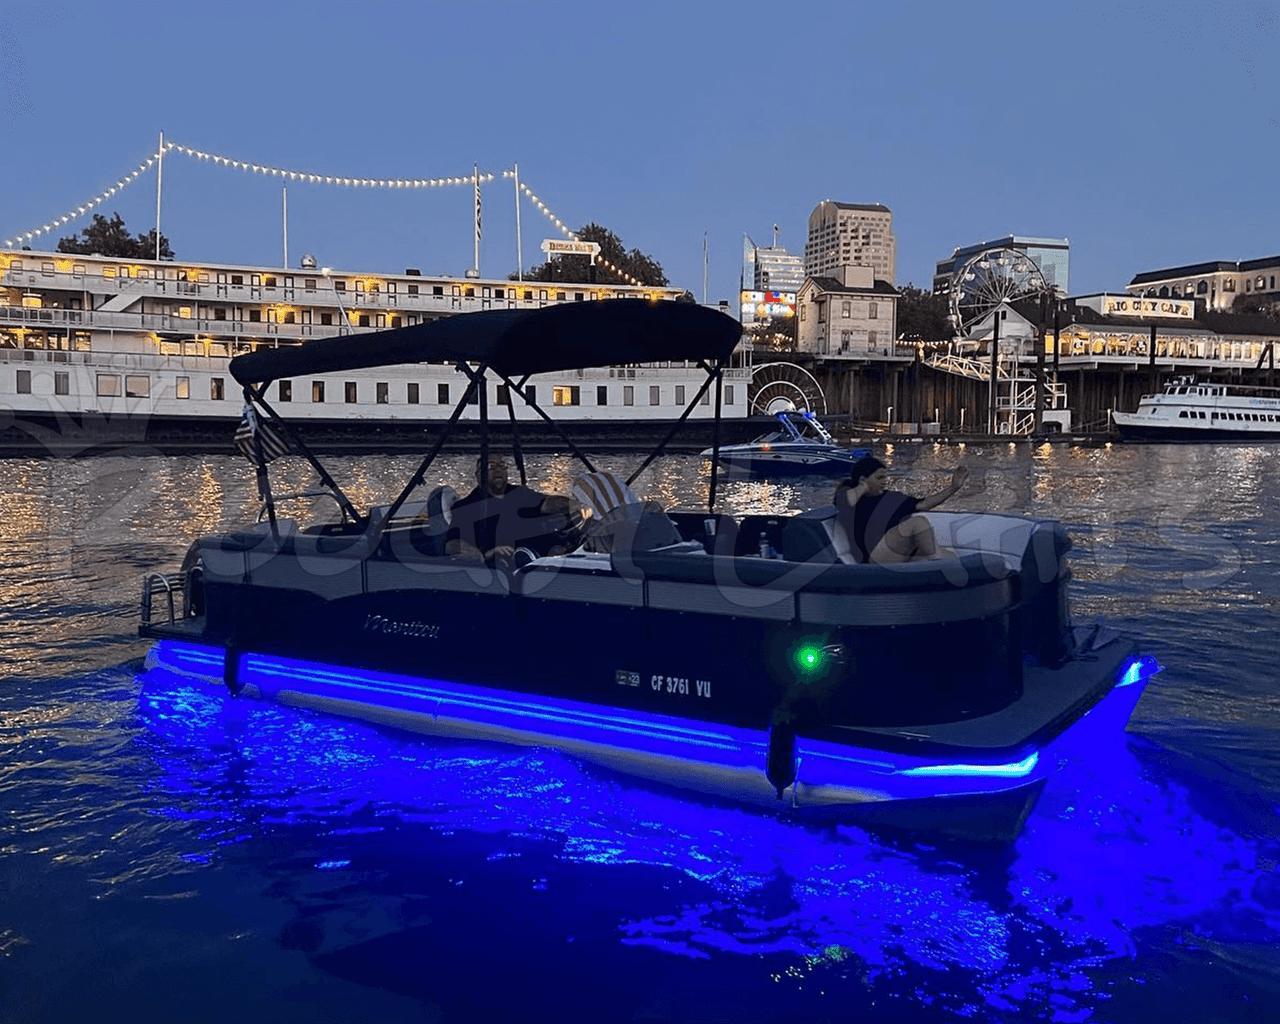 Using LED lighting on your boat - boats.com